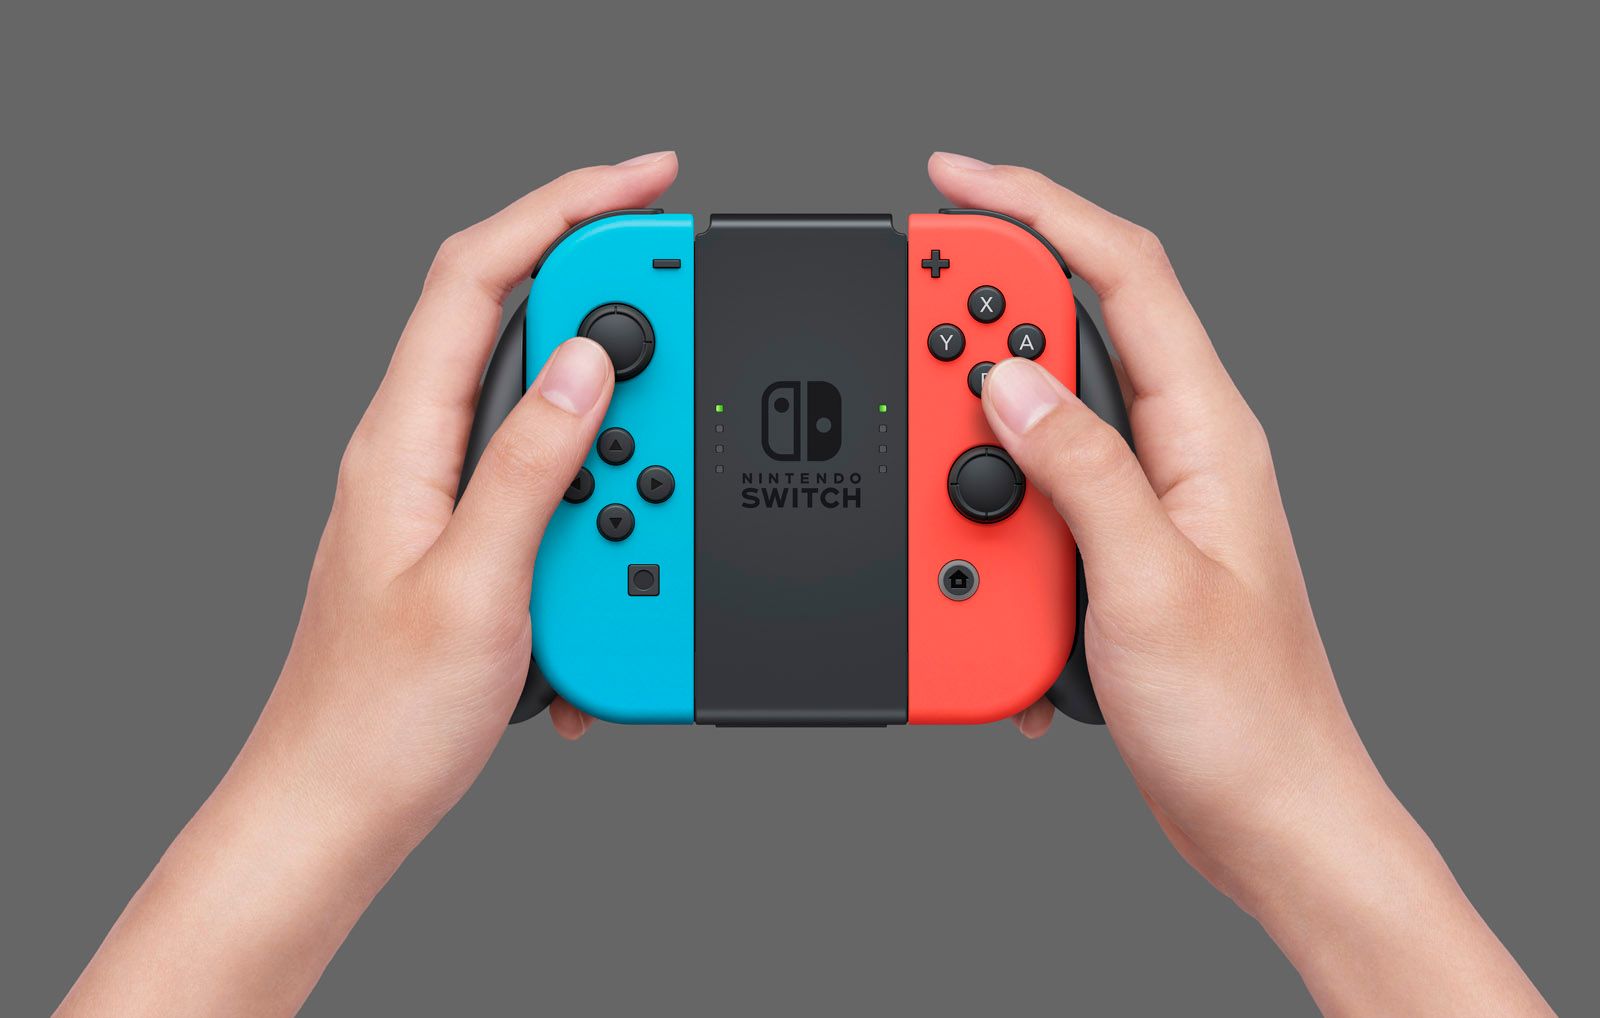 Nintendo Switch hardware - red and blue Joy-Cons in Grip